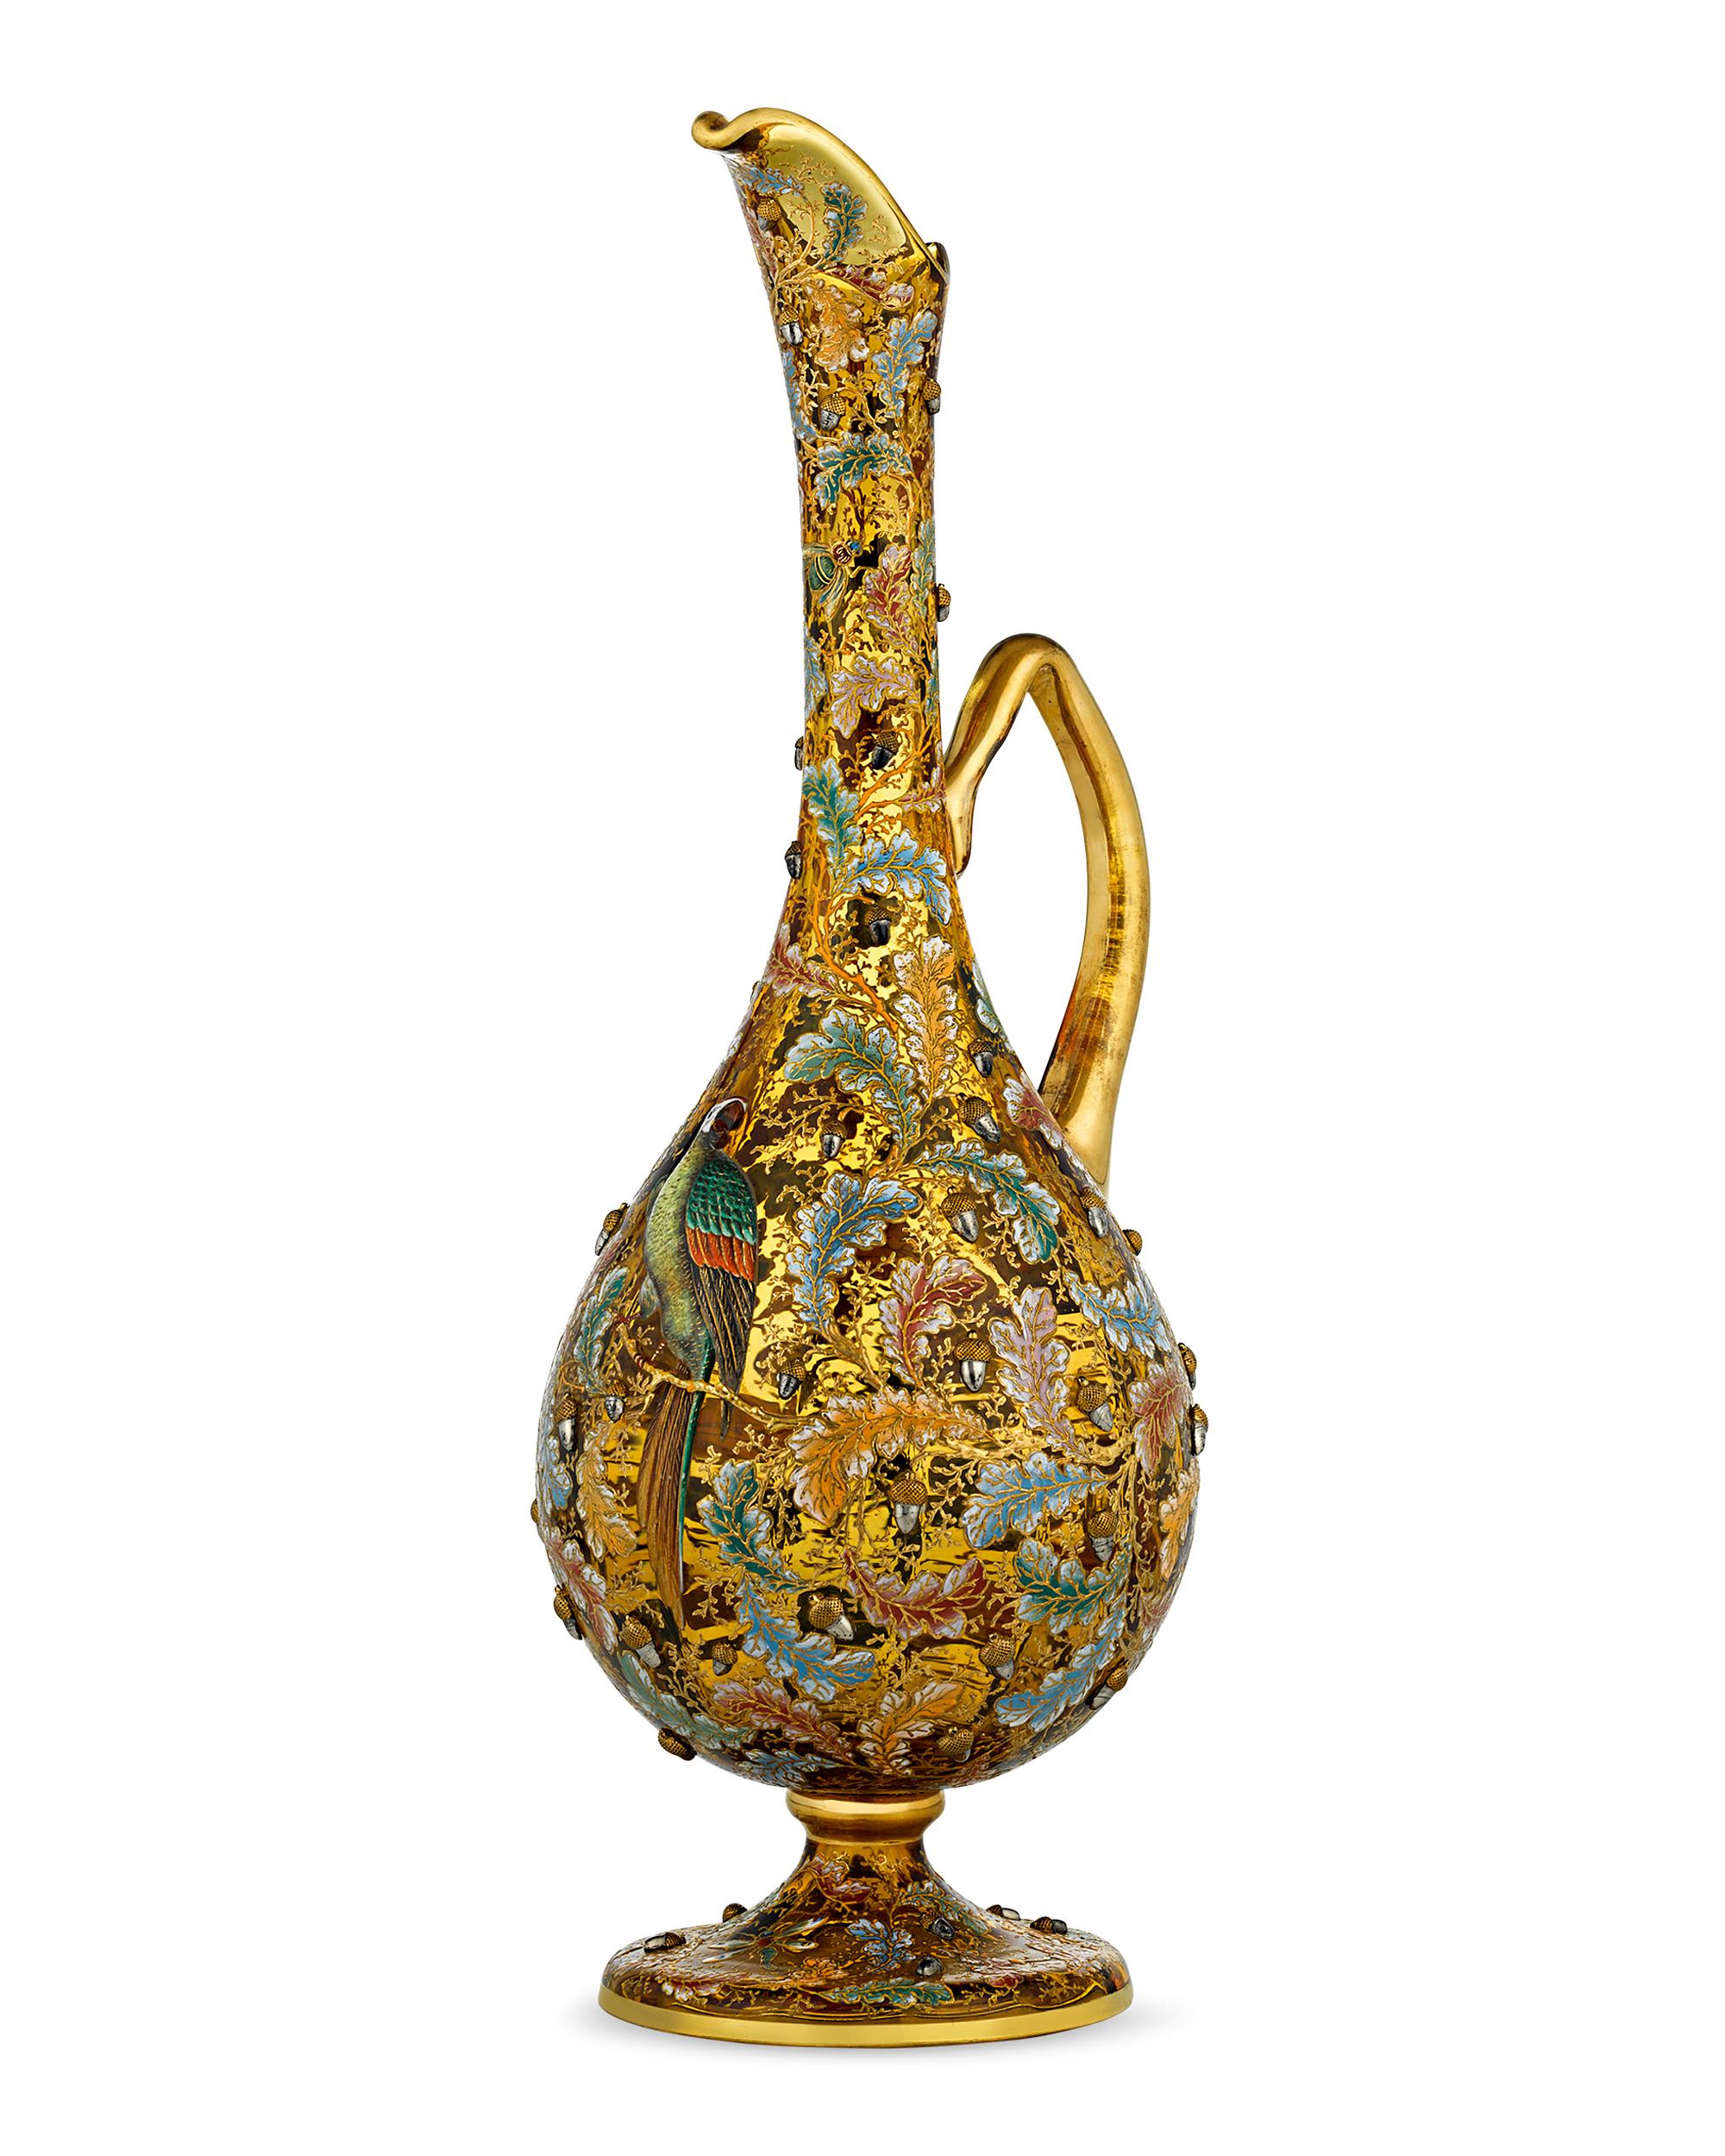 Charming, brightly colored enamel decoration distinguishes this exquisite amber glass ewer by Moser. Applied enamel acorns are surrounded by colorful foliage in this highly desirable wildlife motif from the firm, which perfectly captures the